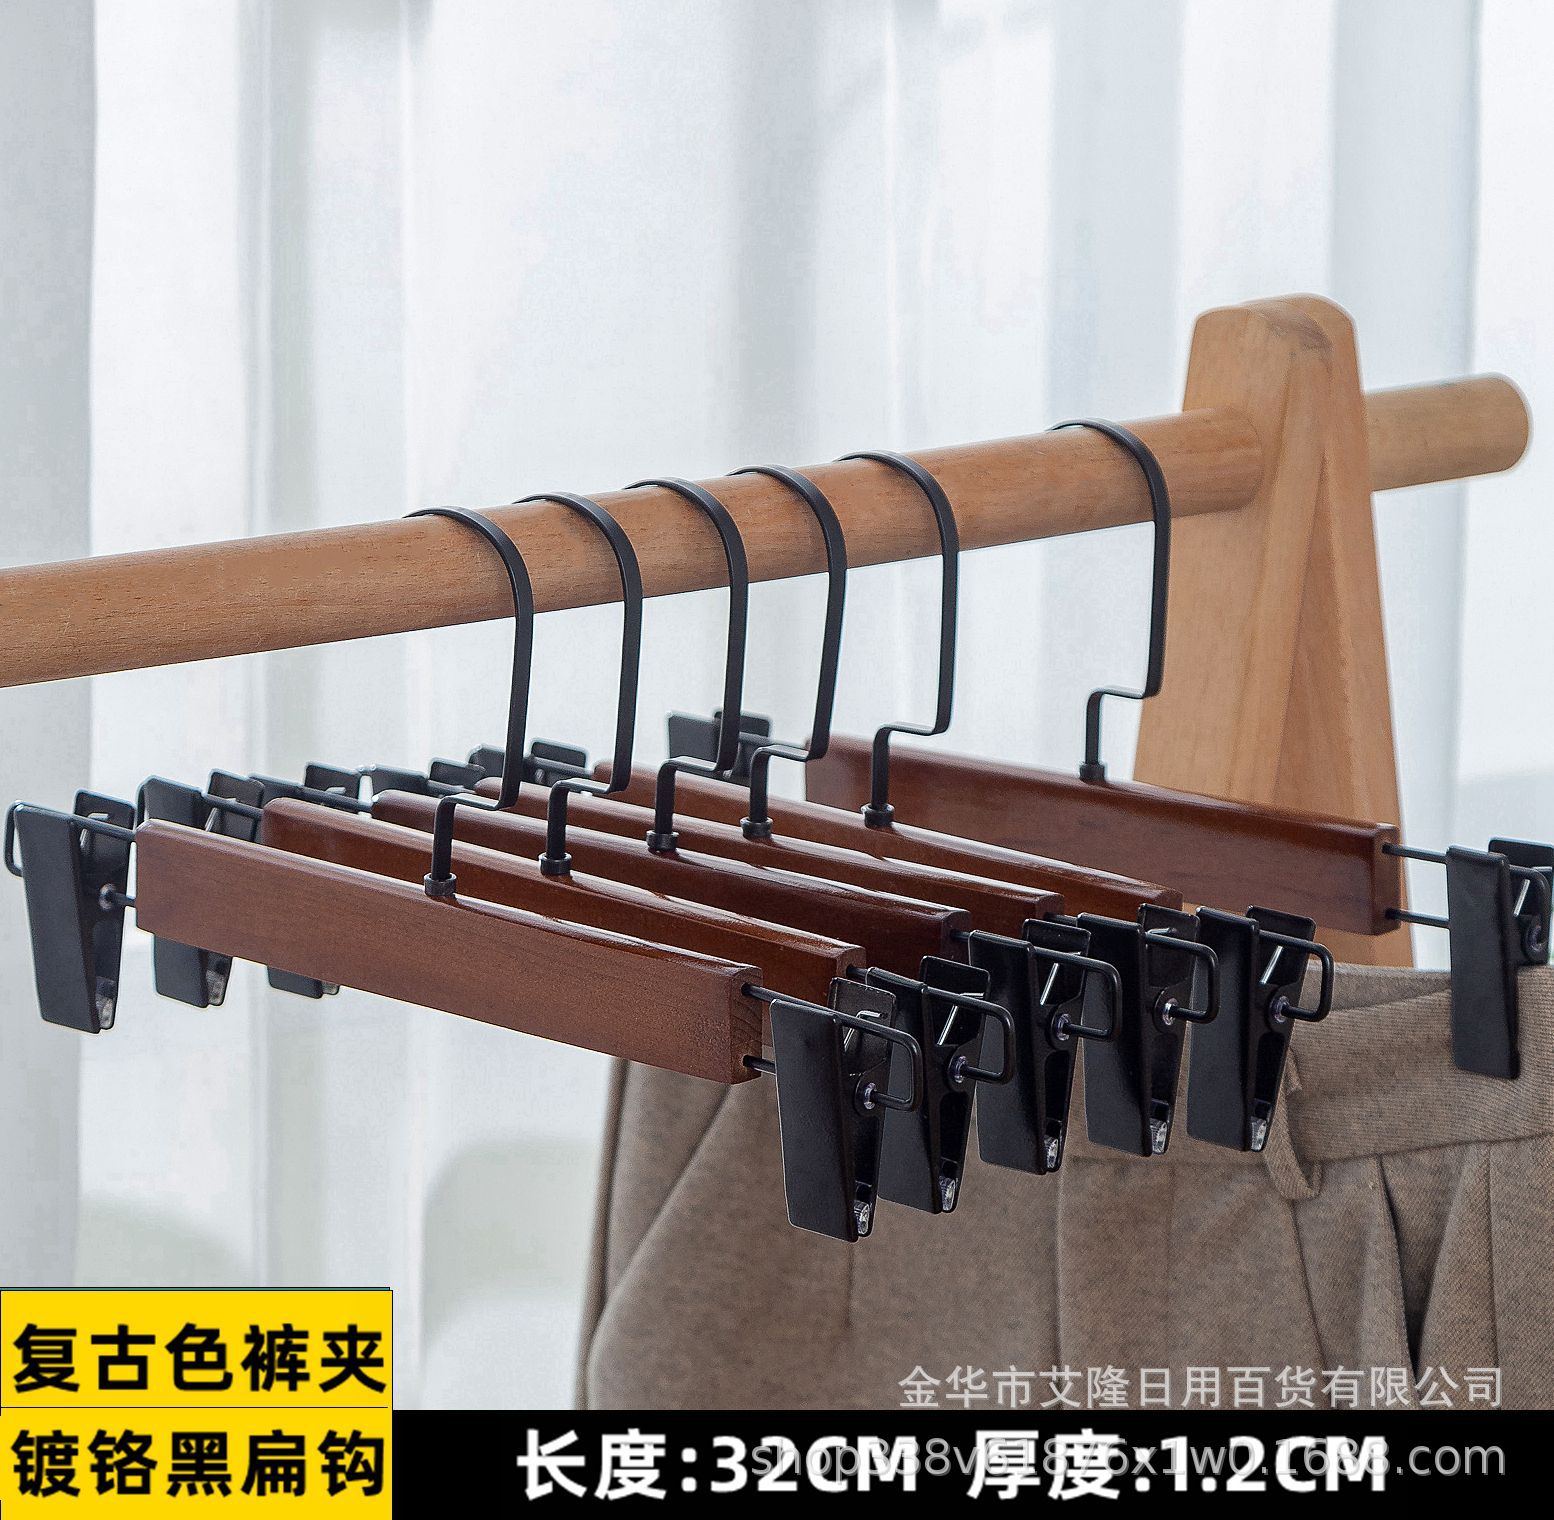 Non-Marking Clothes Hanging Clothes Hanger Wooden Clothes Hanger Clothing Store Hanger Clothes Hanger Solid Wood Non-Slip Wooden Hanger Wholesale